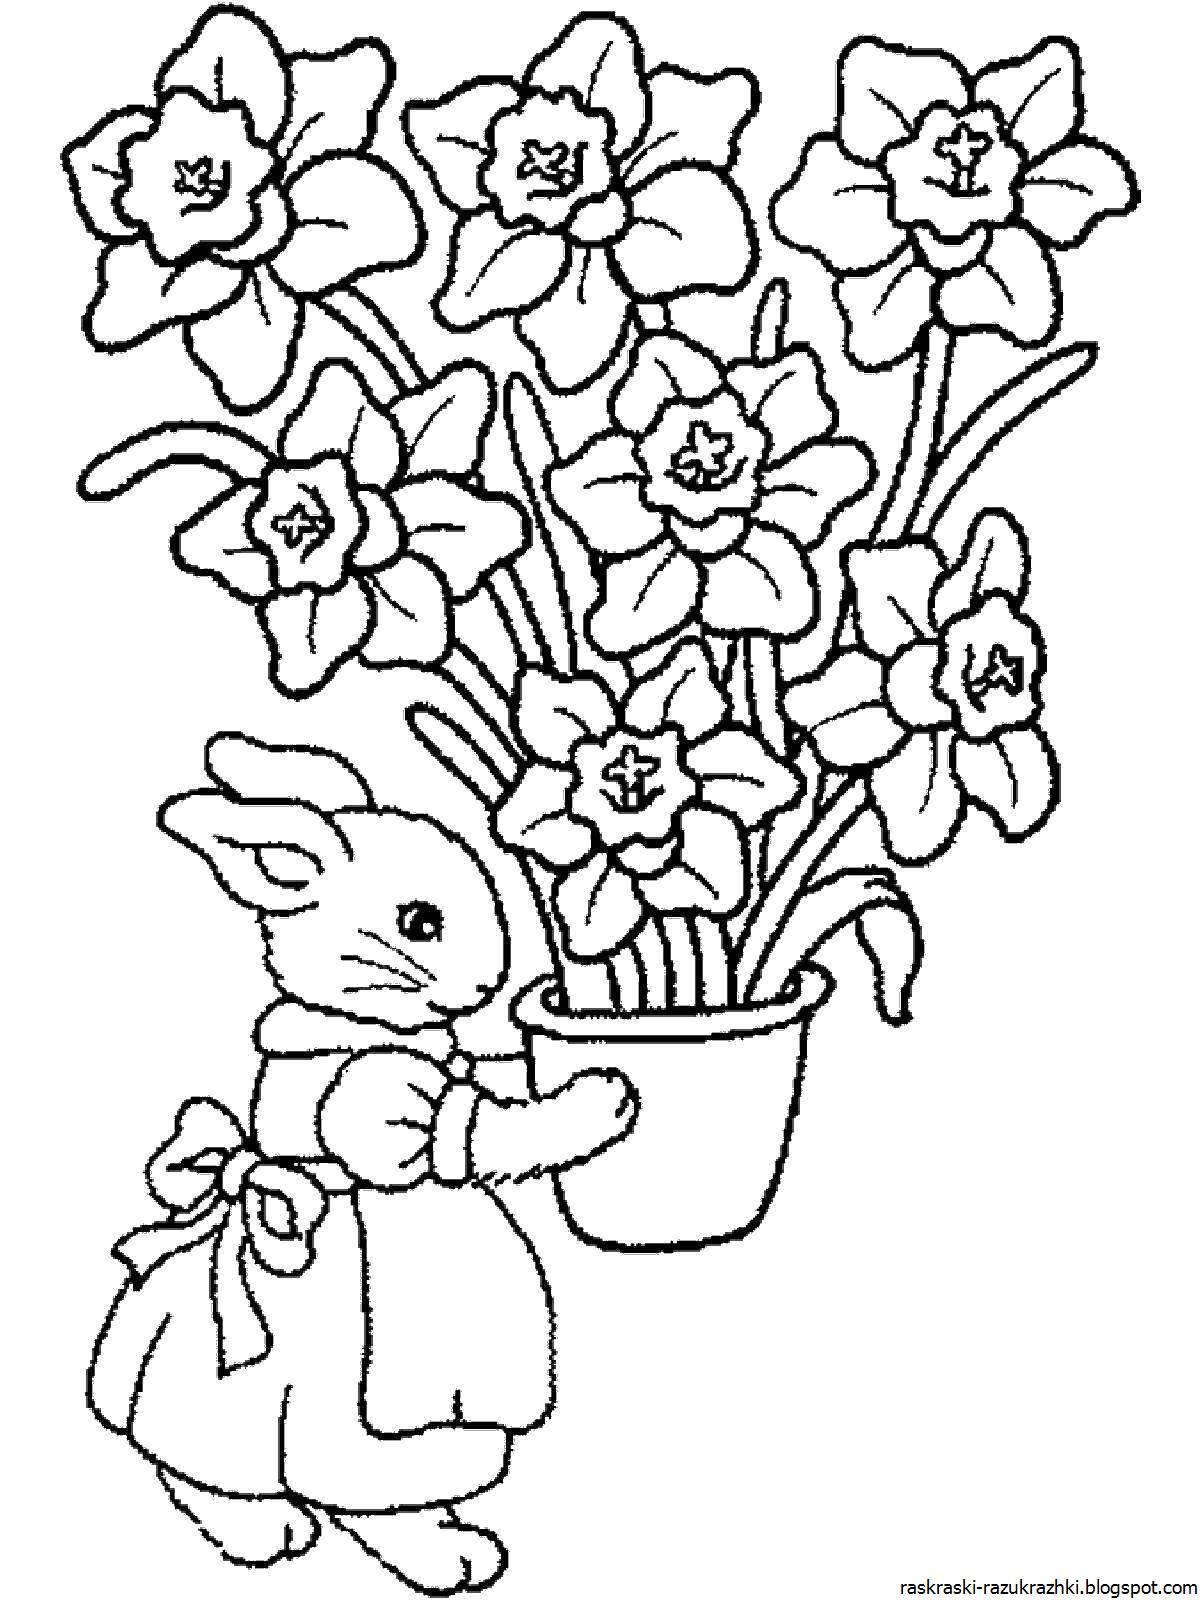 Blissful coloring flowers for children 6-7 years old